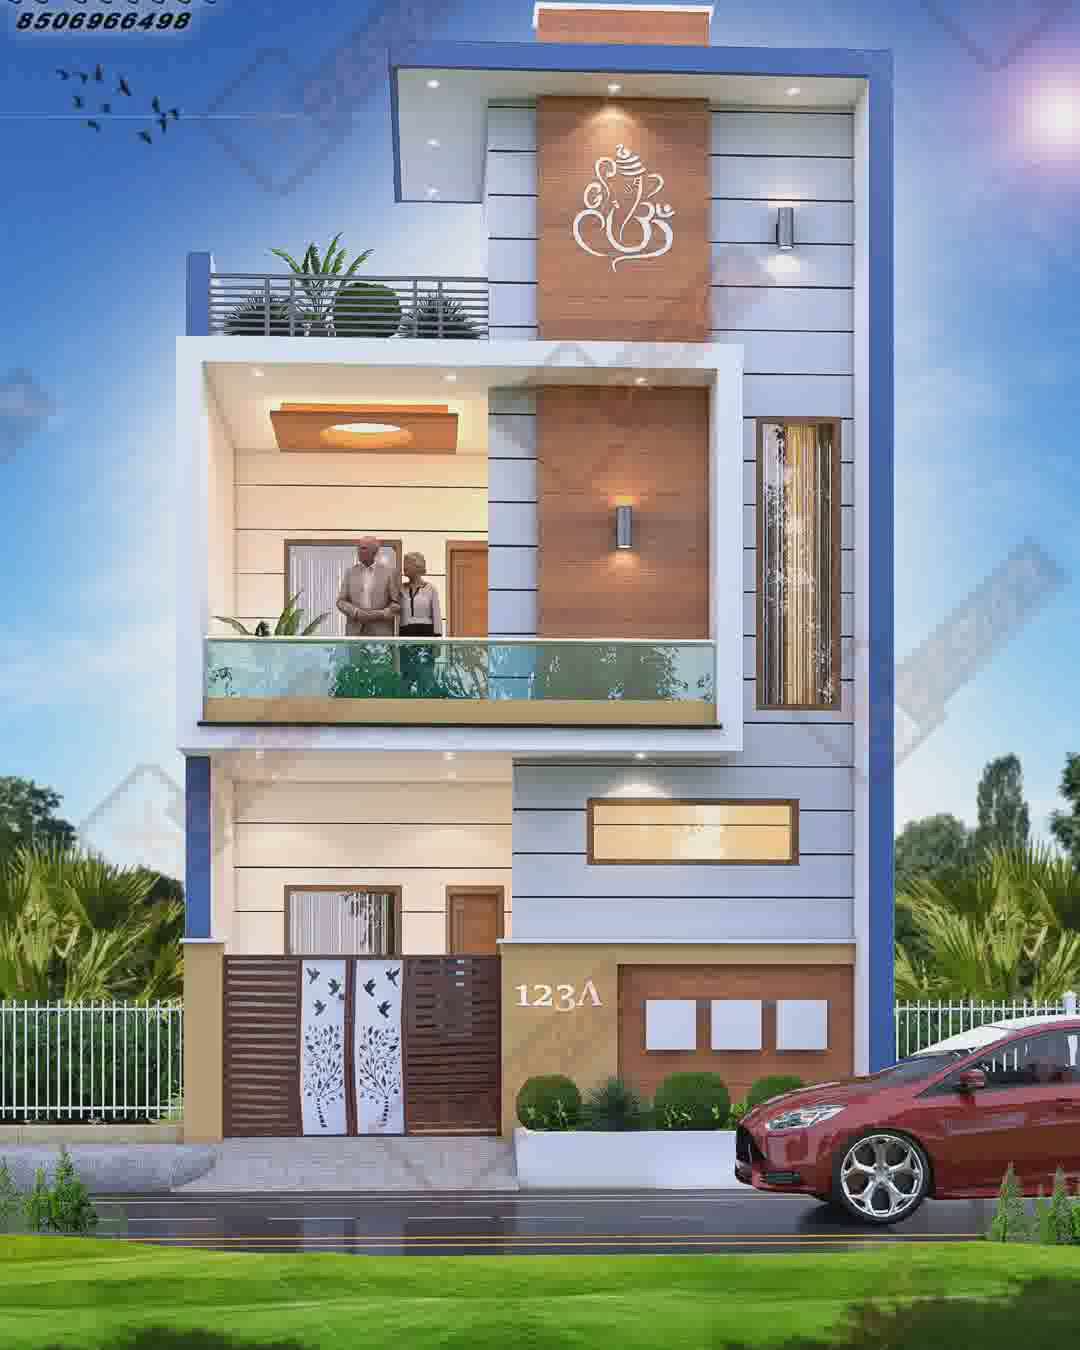 3d house design by me. Rating please 1 to 10 in comments🙏🙏
#architecture #design #interiordesign #art #architecturephotography #photography #travel #interior #architecturelovers #architect #home #homedecor #archilovers #building #photooftheday #arquitectura #instagood #construction #ig #travelphotography #city #homedesign #d #decor #nature #love #luxury #picoftheday #interiors #realestate

#landscape #archdaily #designer #arquitetura #house #italy #architecturedesign #streetphotography #o #decoration #interiordesigner #architettura #history #photo #instagram #beautiful #travelgram #europe #bhfyp #furniture #style #render #inspiration #architects #italia #urban #architektur #bnw #arch #france
#architecture #travelgram #italy #luxury #interiordesign #bhfyp #homedecor #streetphotography #france #city #decor #designer #interior #italia #europe #realestate #house #decoration #urban #history #bnw #sketchup #sketchupmodeling #shorts 


Instagram :- https://www.instagram.com/invites/contact/